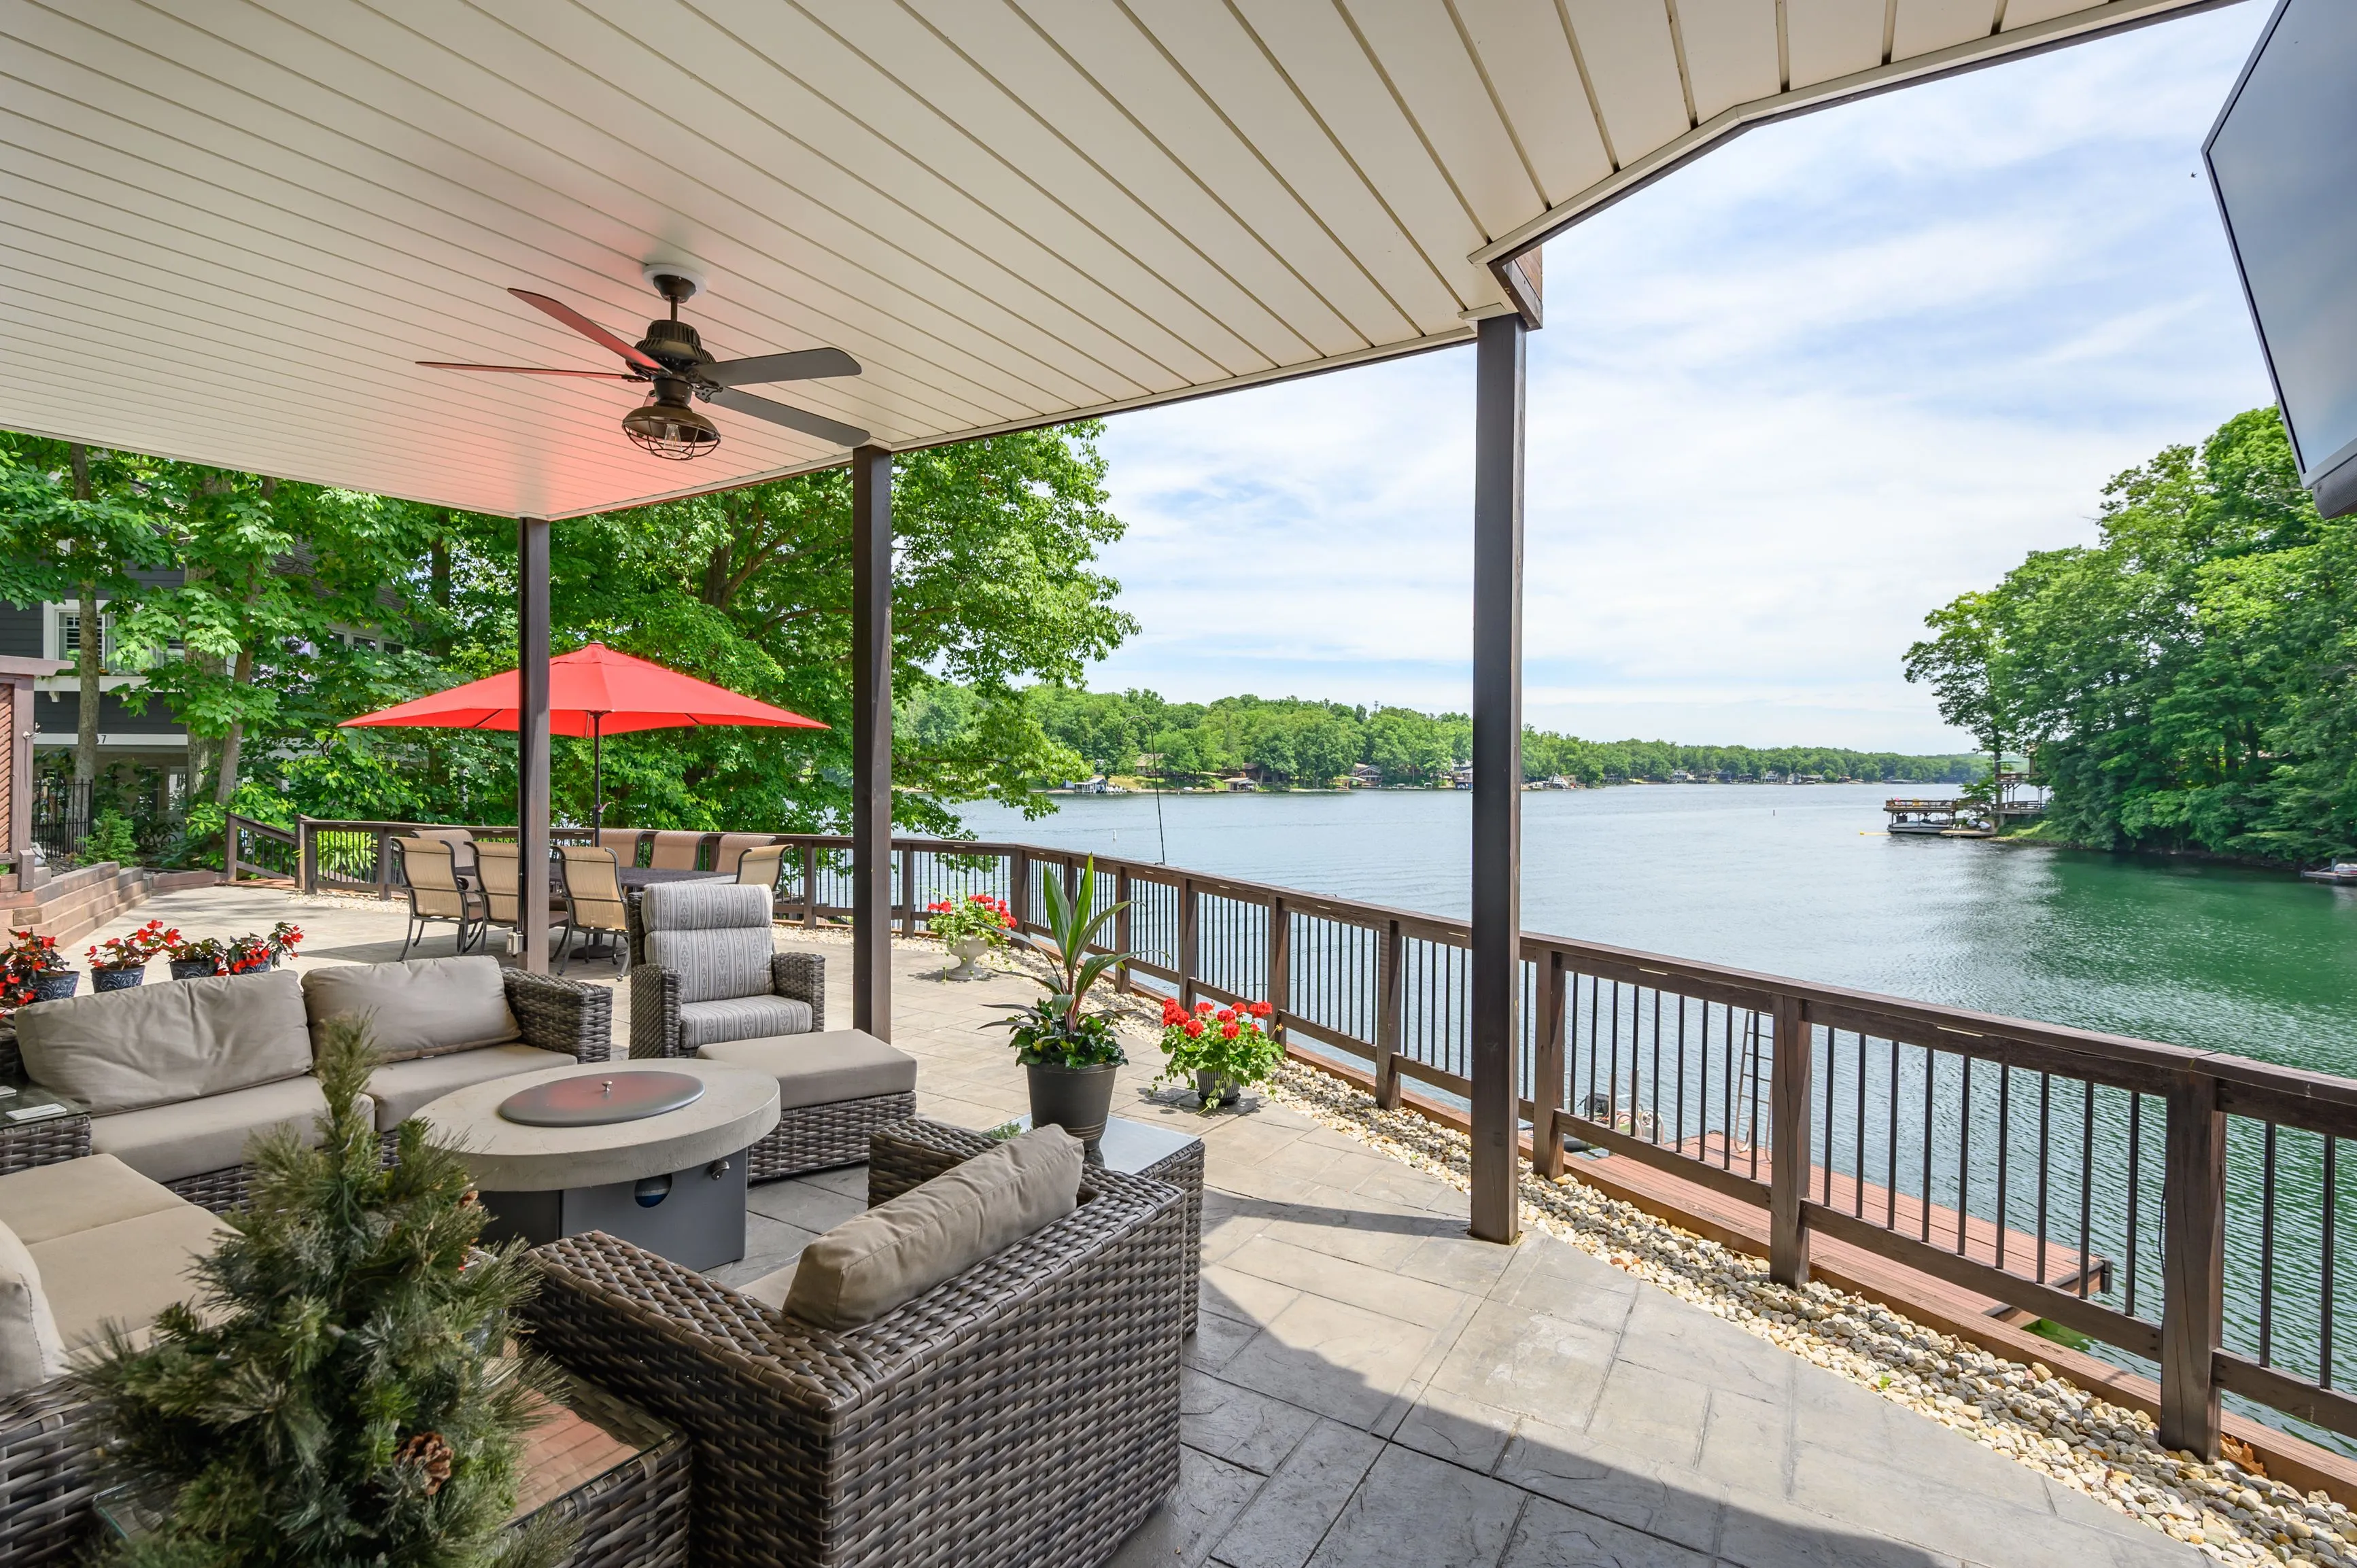 Outdoor patio with comfortable seating overlooking a calm lake with greenery in the background.